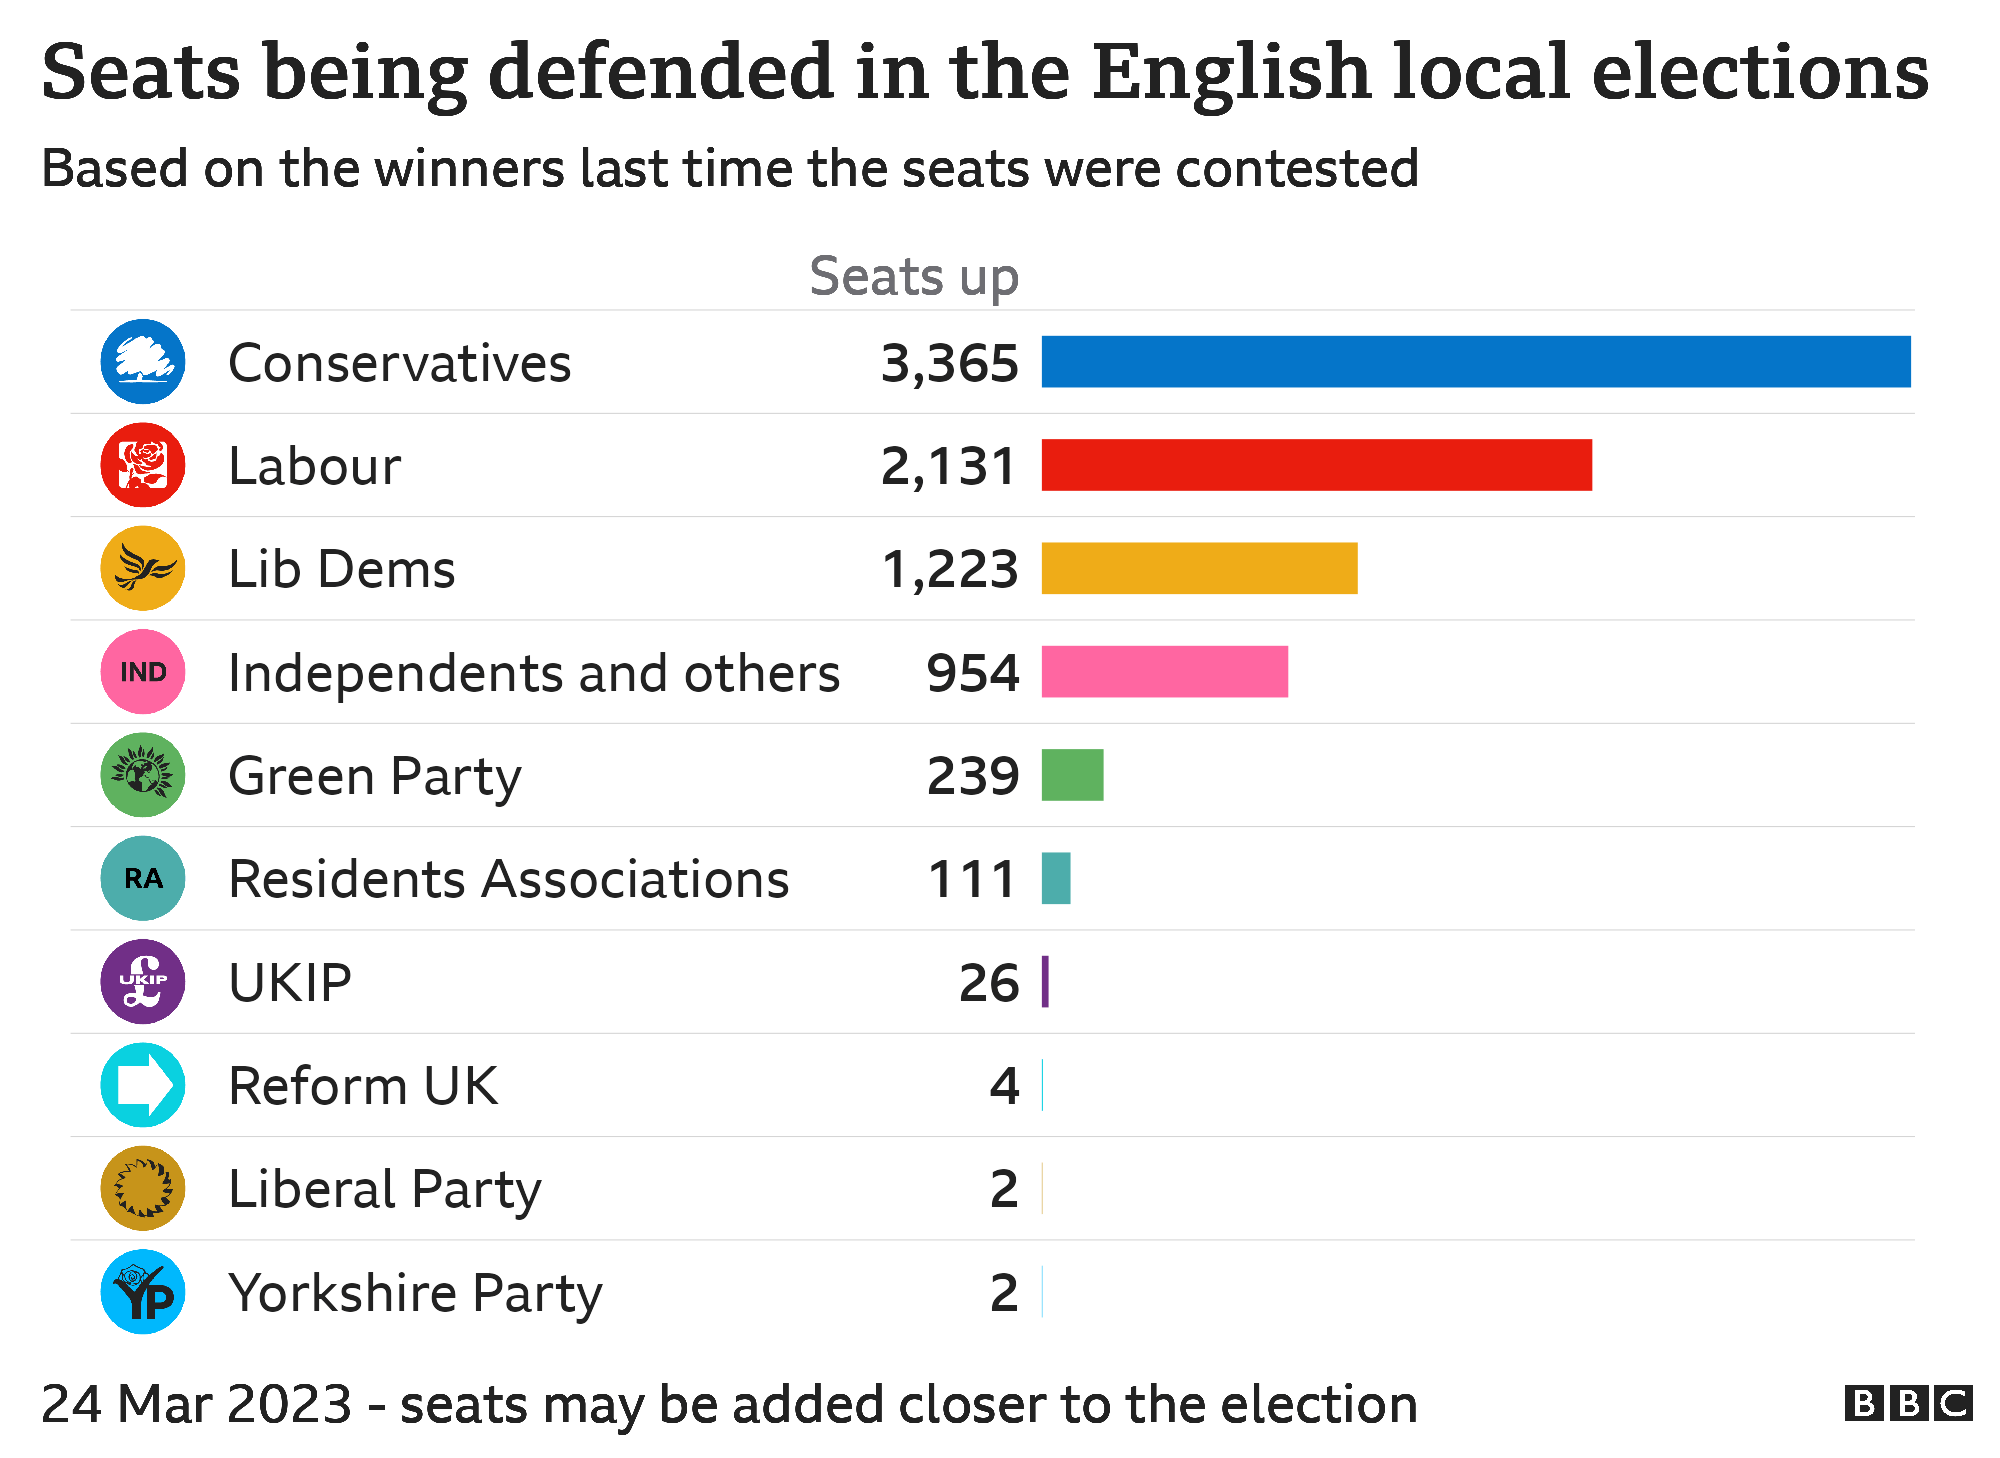 Bar chart showing council seats defended by each party in England, Conservatives 3365, Labour 2131, Lib Dems 1223, Independents and others 954, Green Party 239, Residents' Associations 111, UKIP 26, Reform UK 4, Liberal Party 2, Yorkshire Party 2.